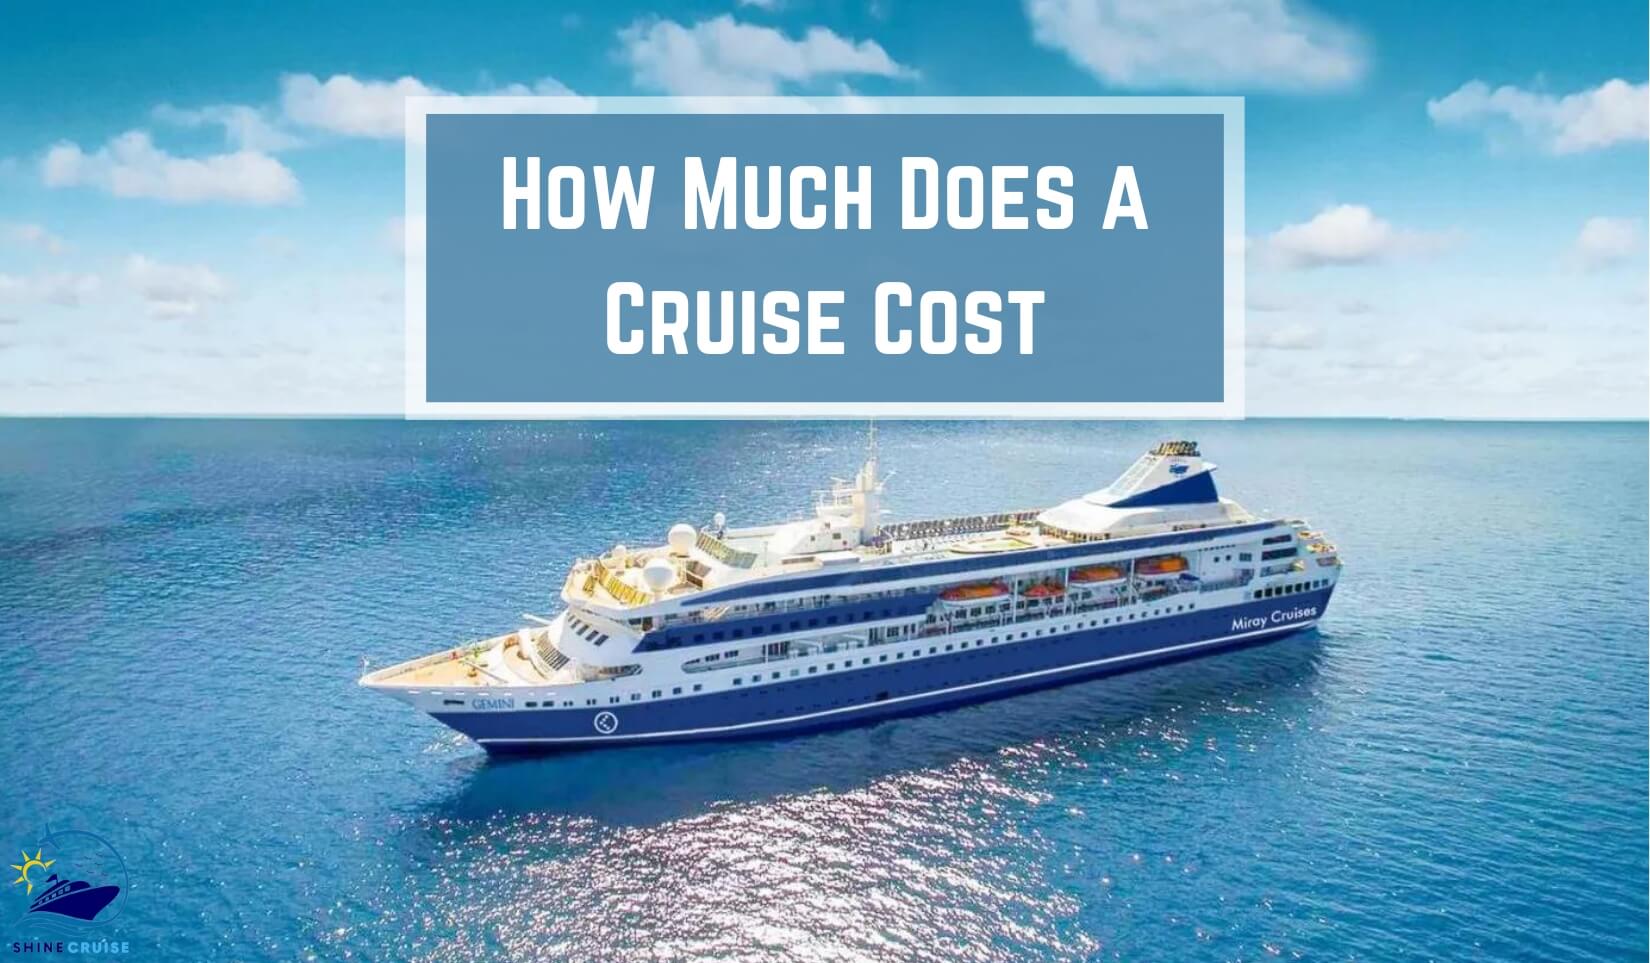 how much does a cruise cost how much is a cruise ship how much are cruises how much does it cost to go on a cruise how much do cruises cost